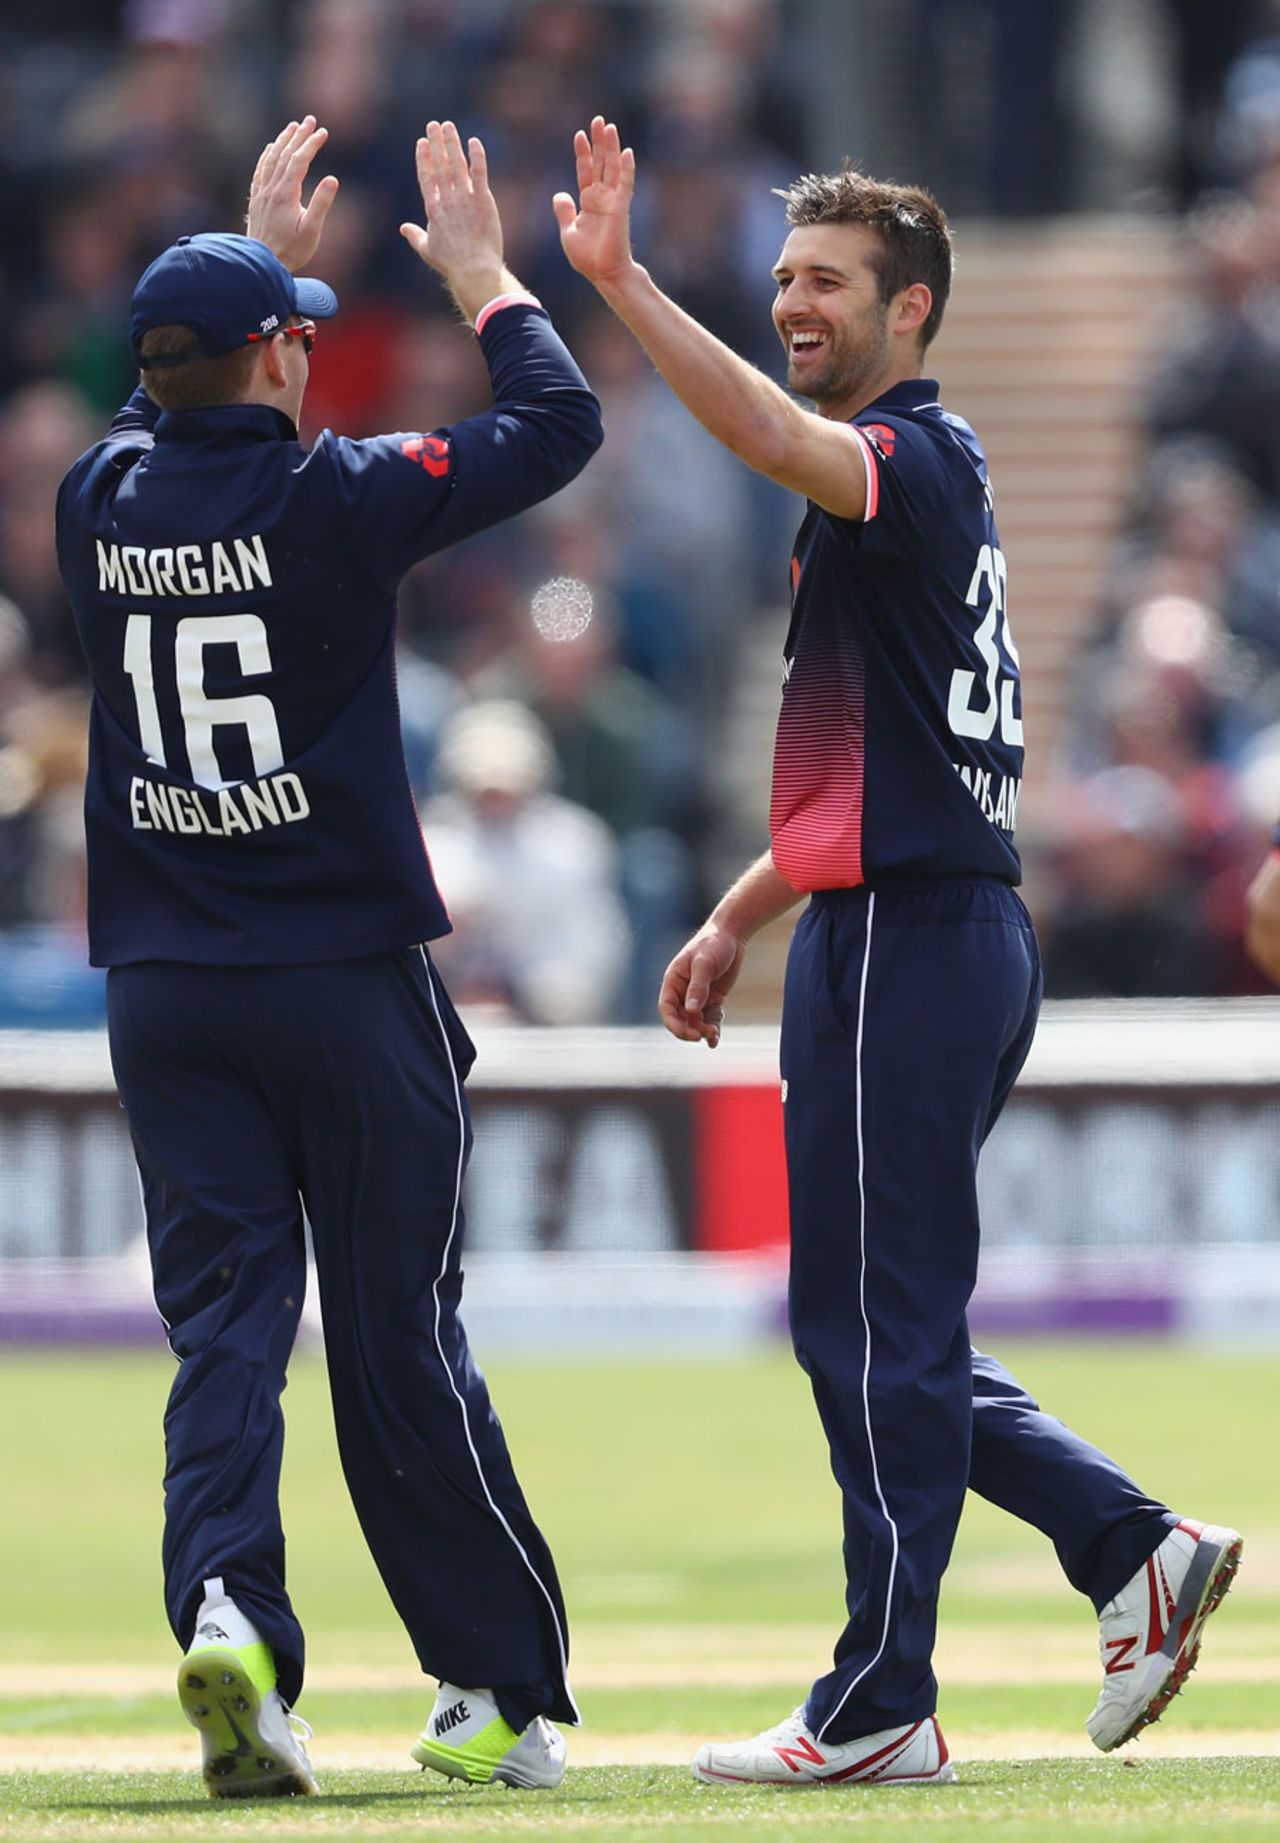 Mark Wood struck first with the new ball, England v Ireland, 1st ODI, Bristol, May 5, 2017